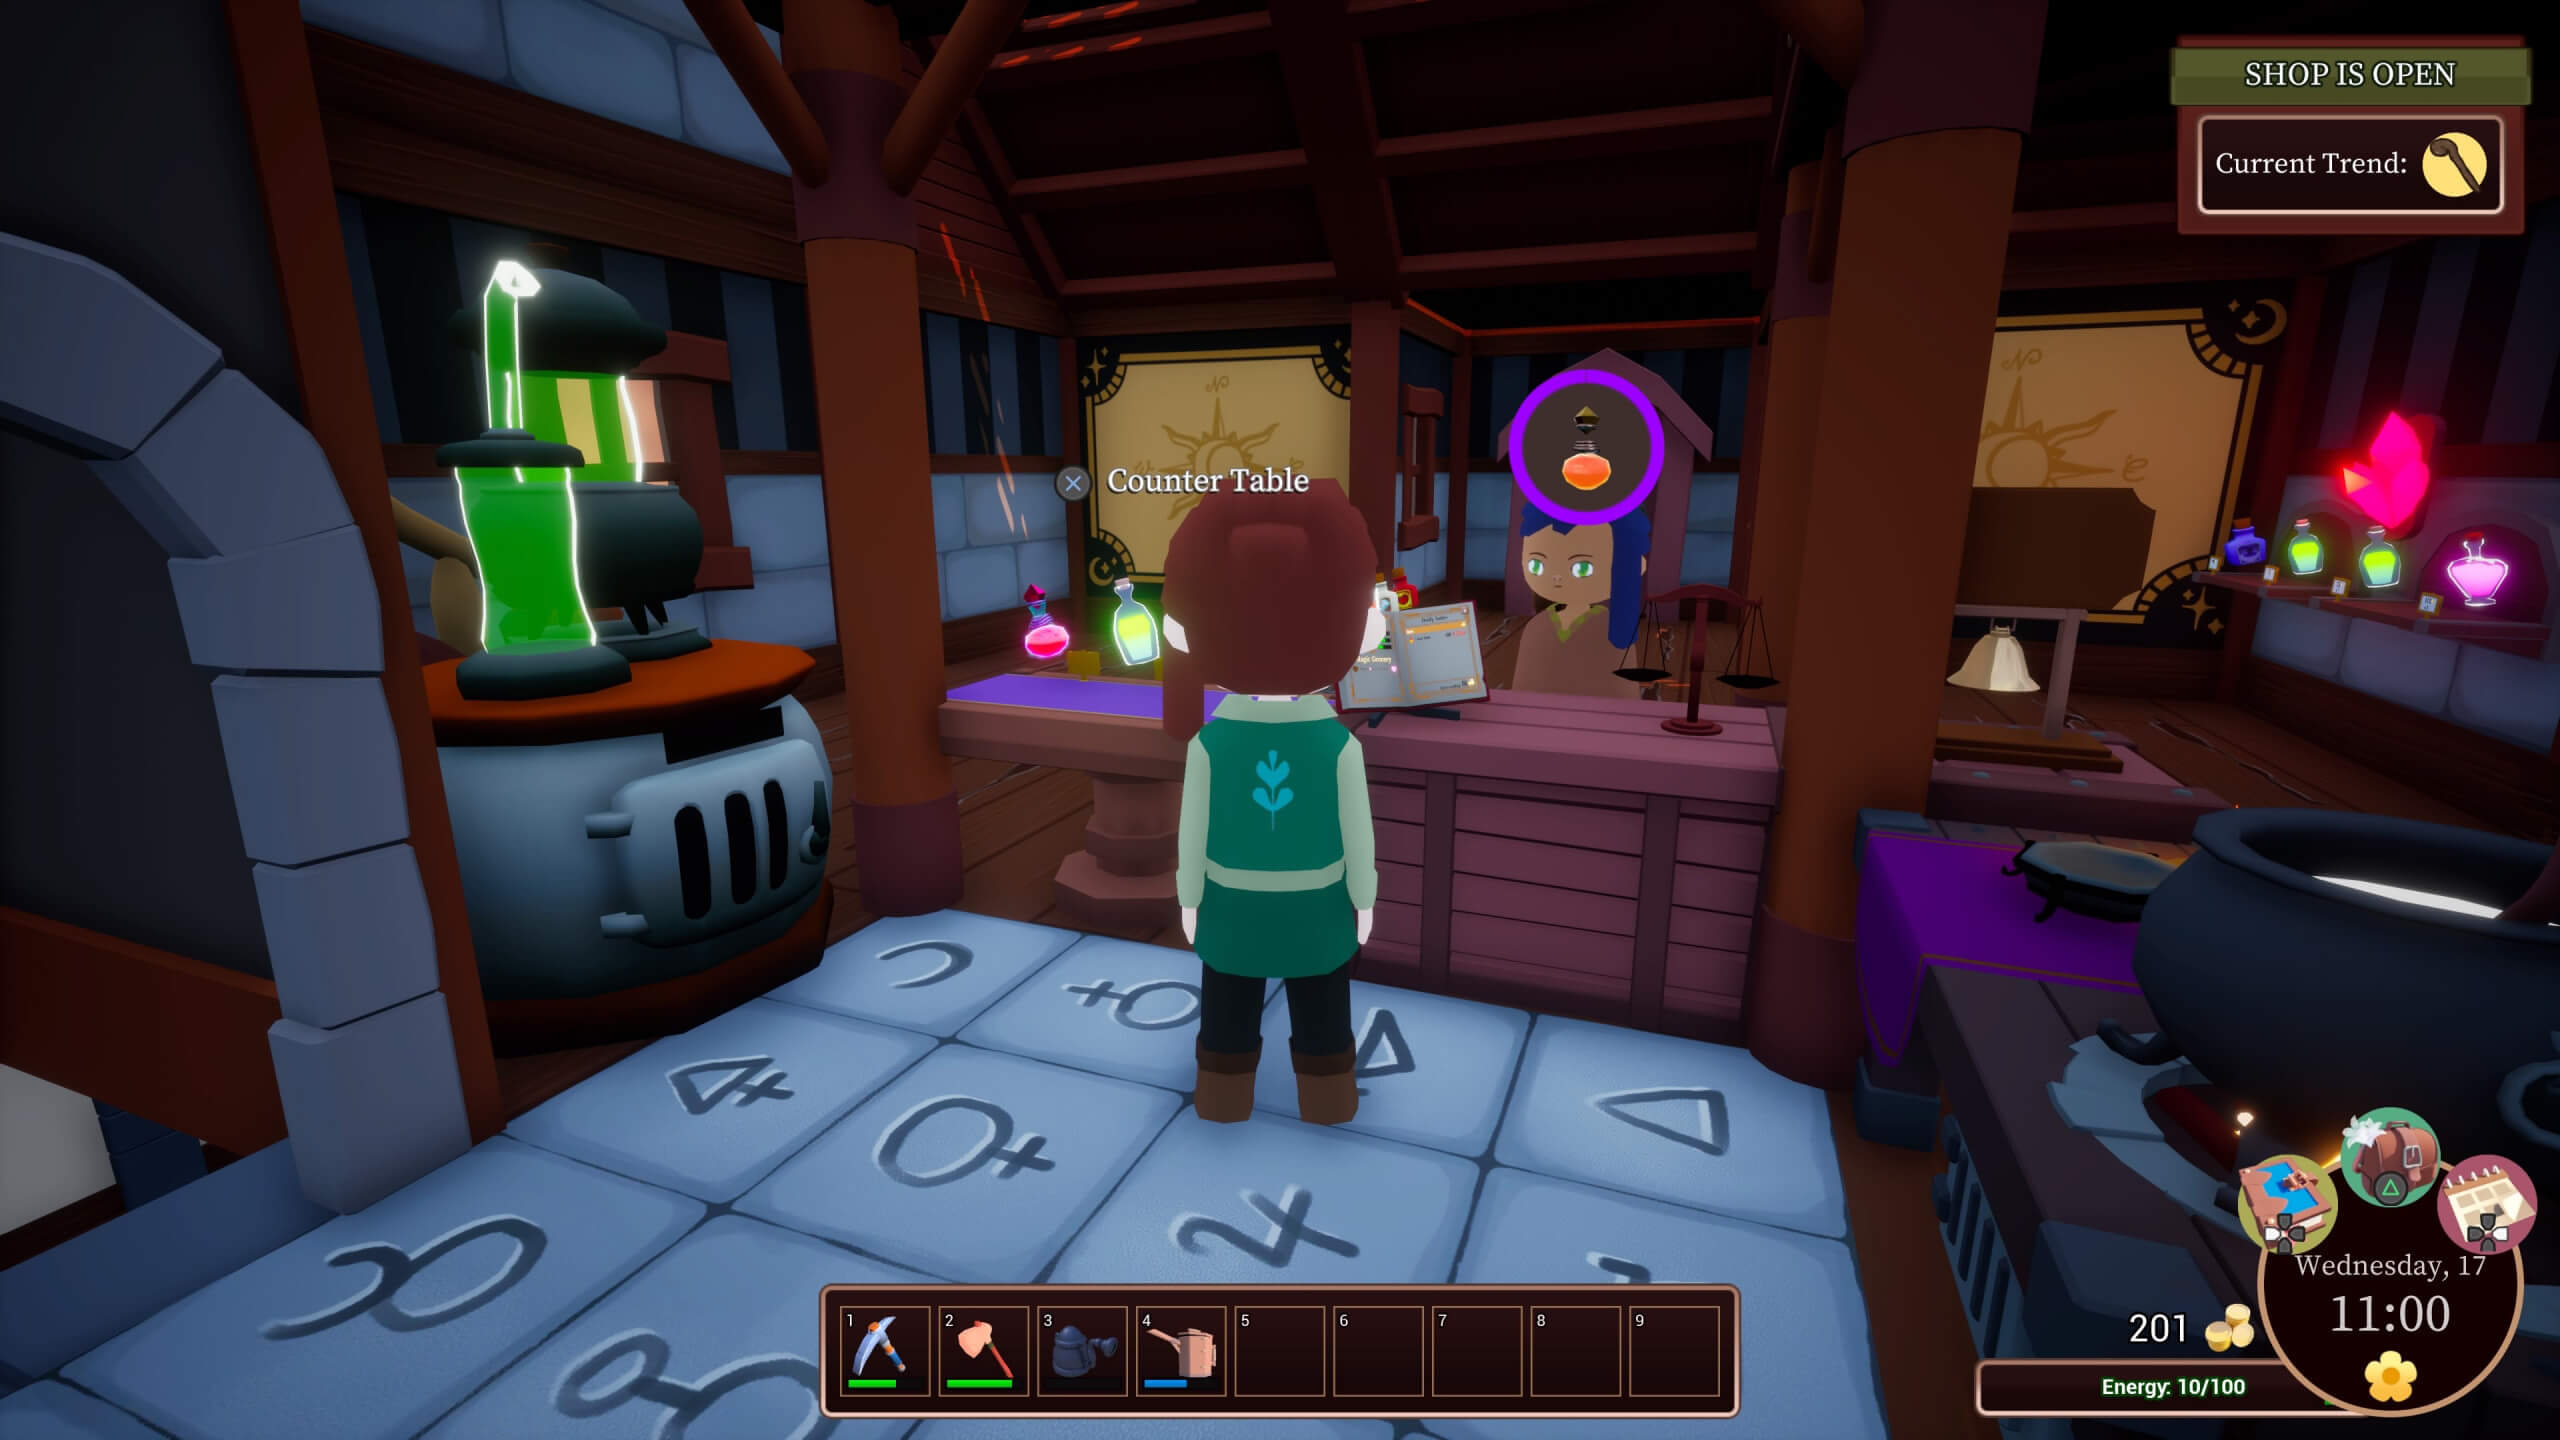 The interior of the shop, with a customer asking for a potion.